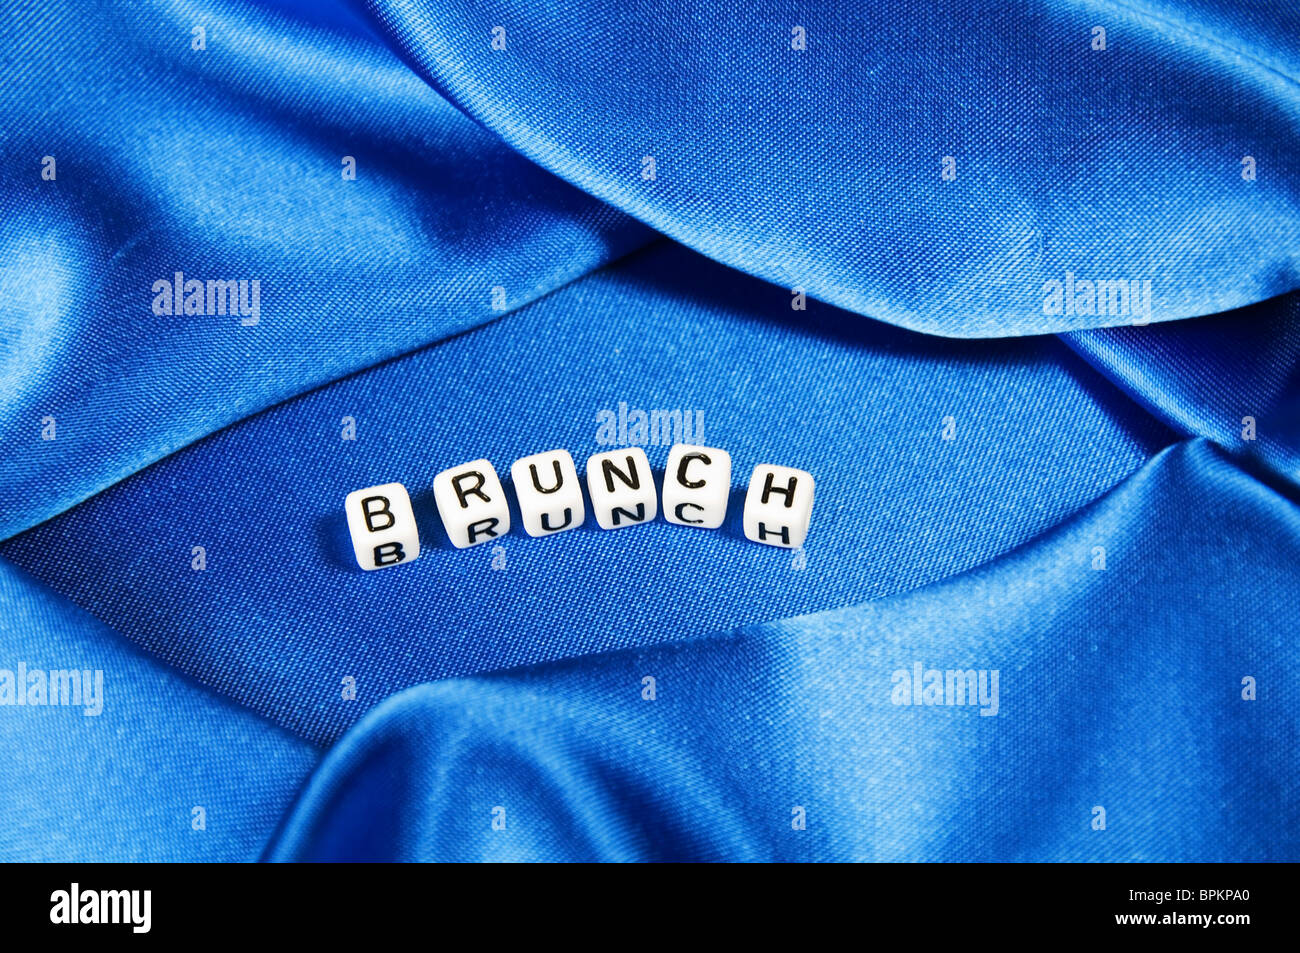 Royal blue satin background with rich folds and wrinkles for texture is the word brunch in black and white cube lettering series Stock Photo